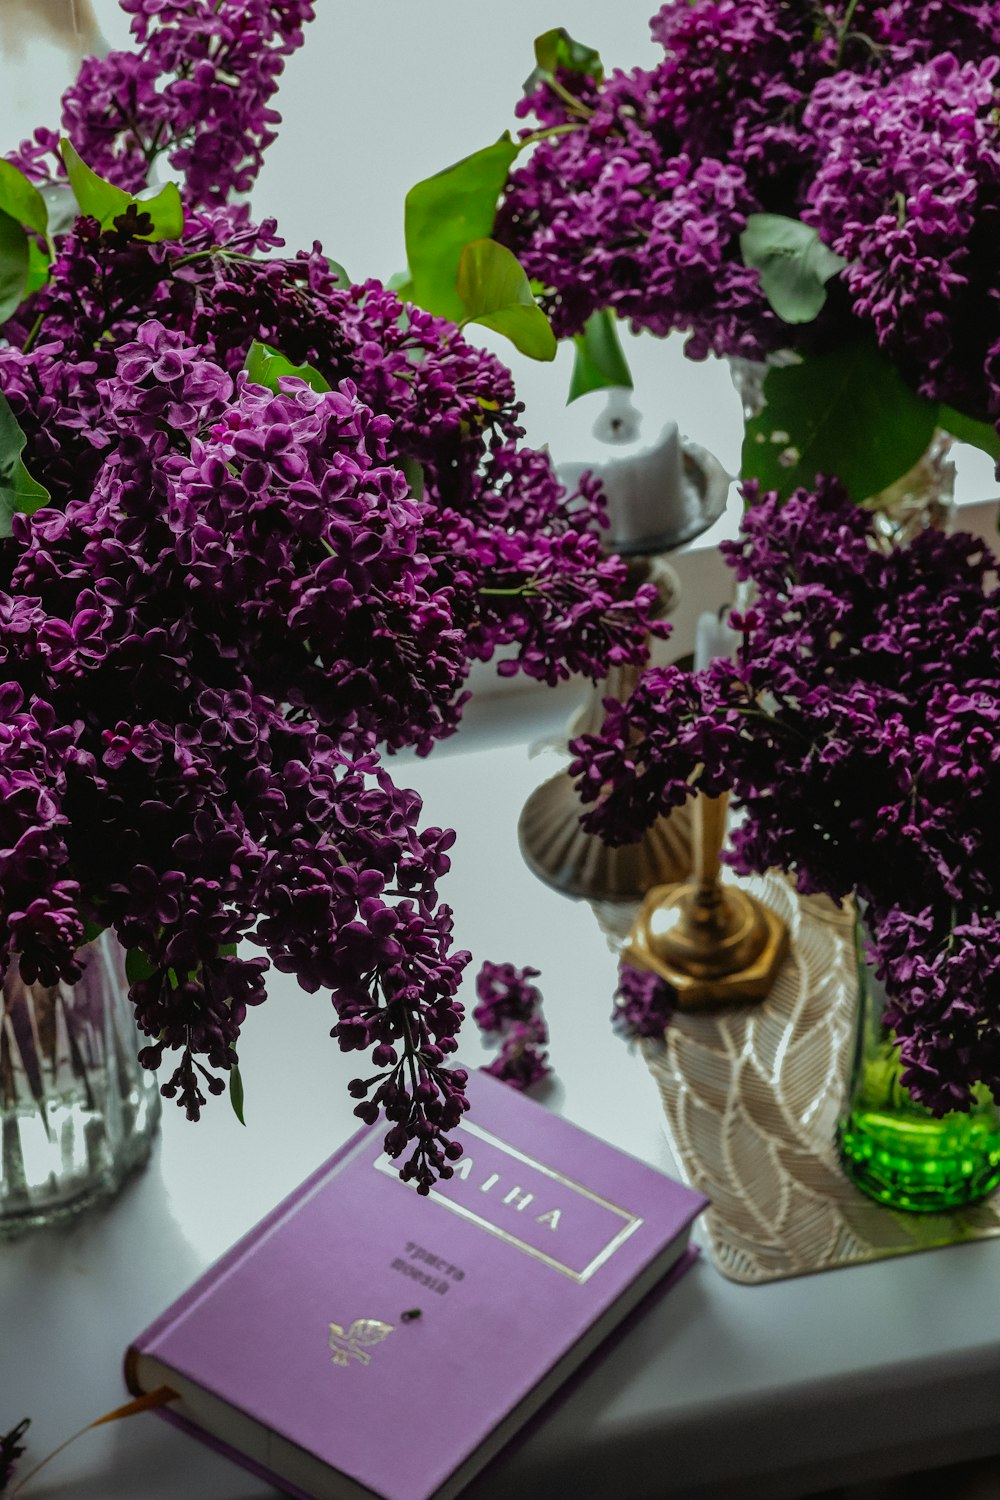 purple flowers in a vase and a book on a table